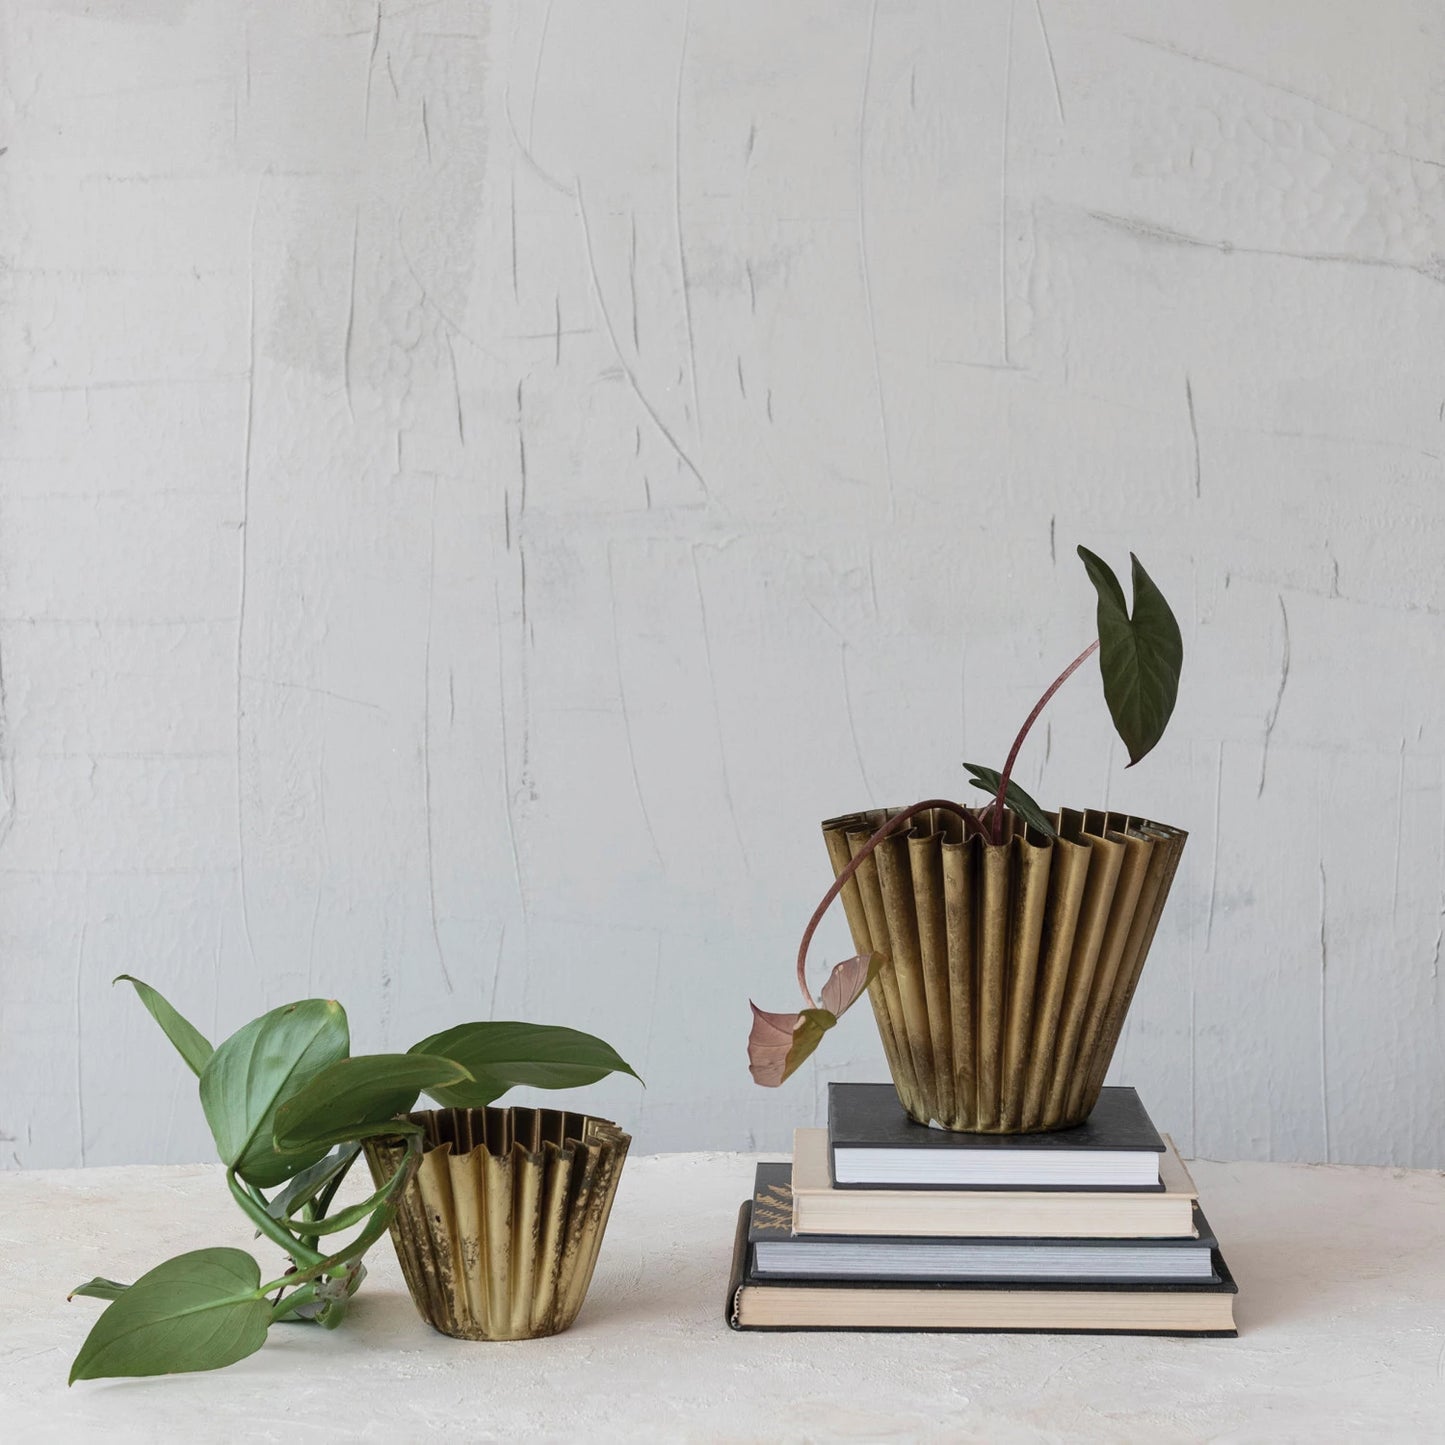 Pleated Brass Vase - Small